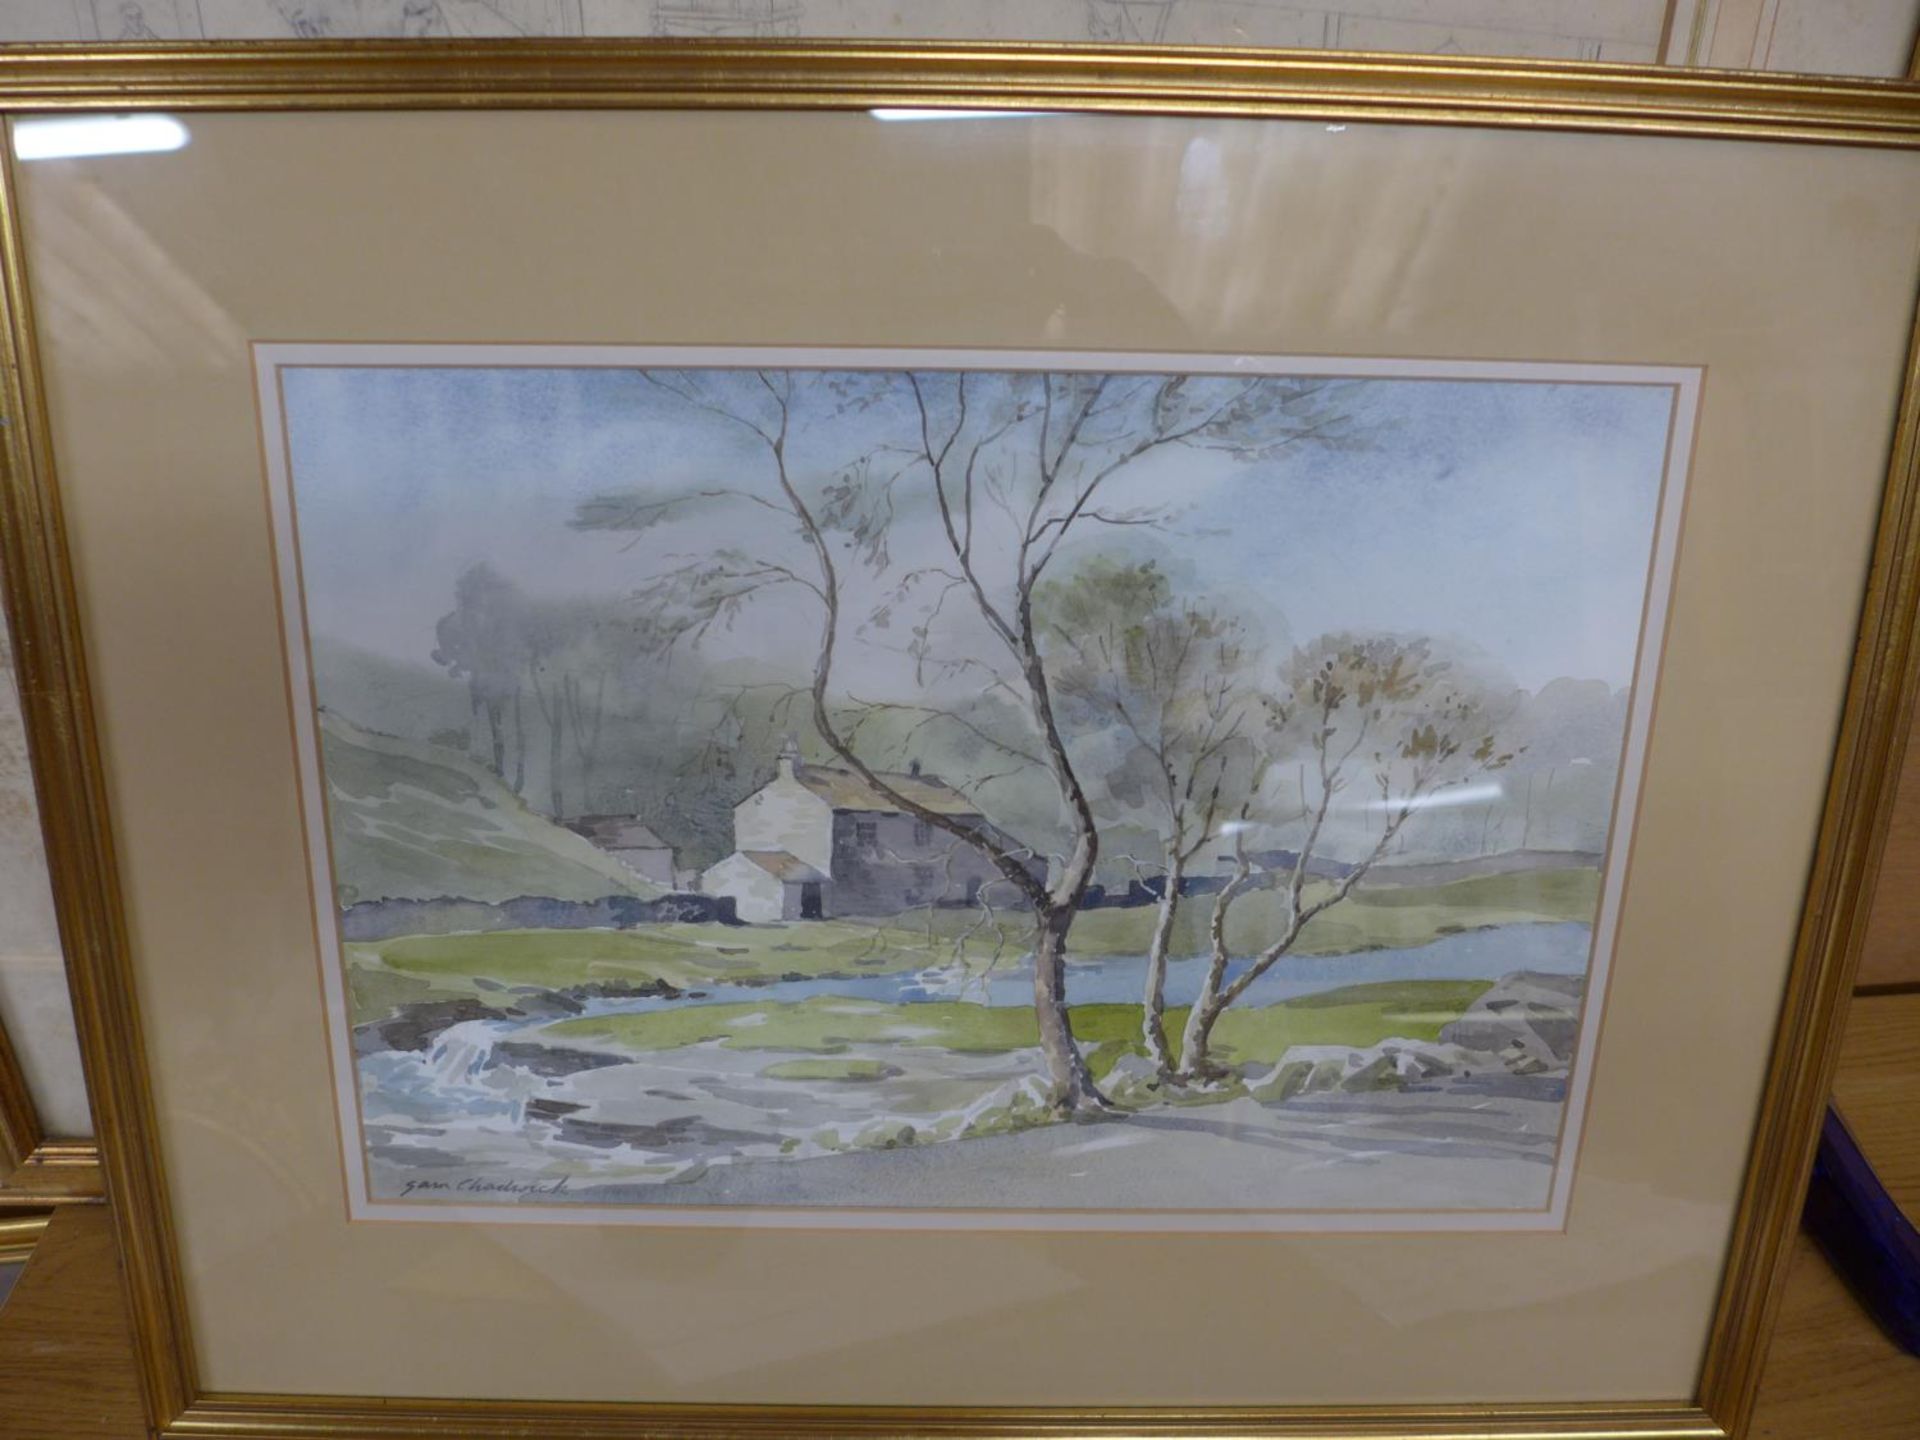 SAM CHADWICK (1902-1992) RIVER SCENE WITH A STONE COTTAGE, WATERCOLOUR, SIGNED, 27X40CM, FRAMED